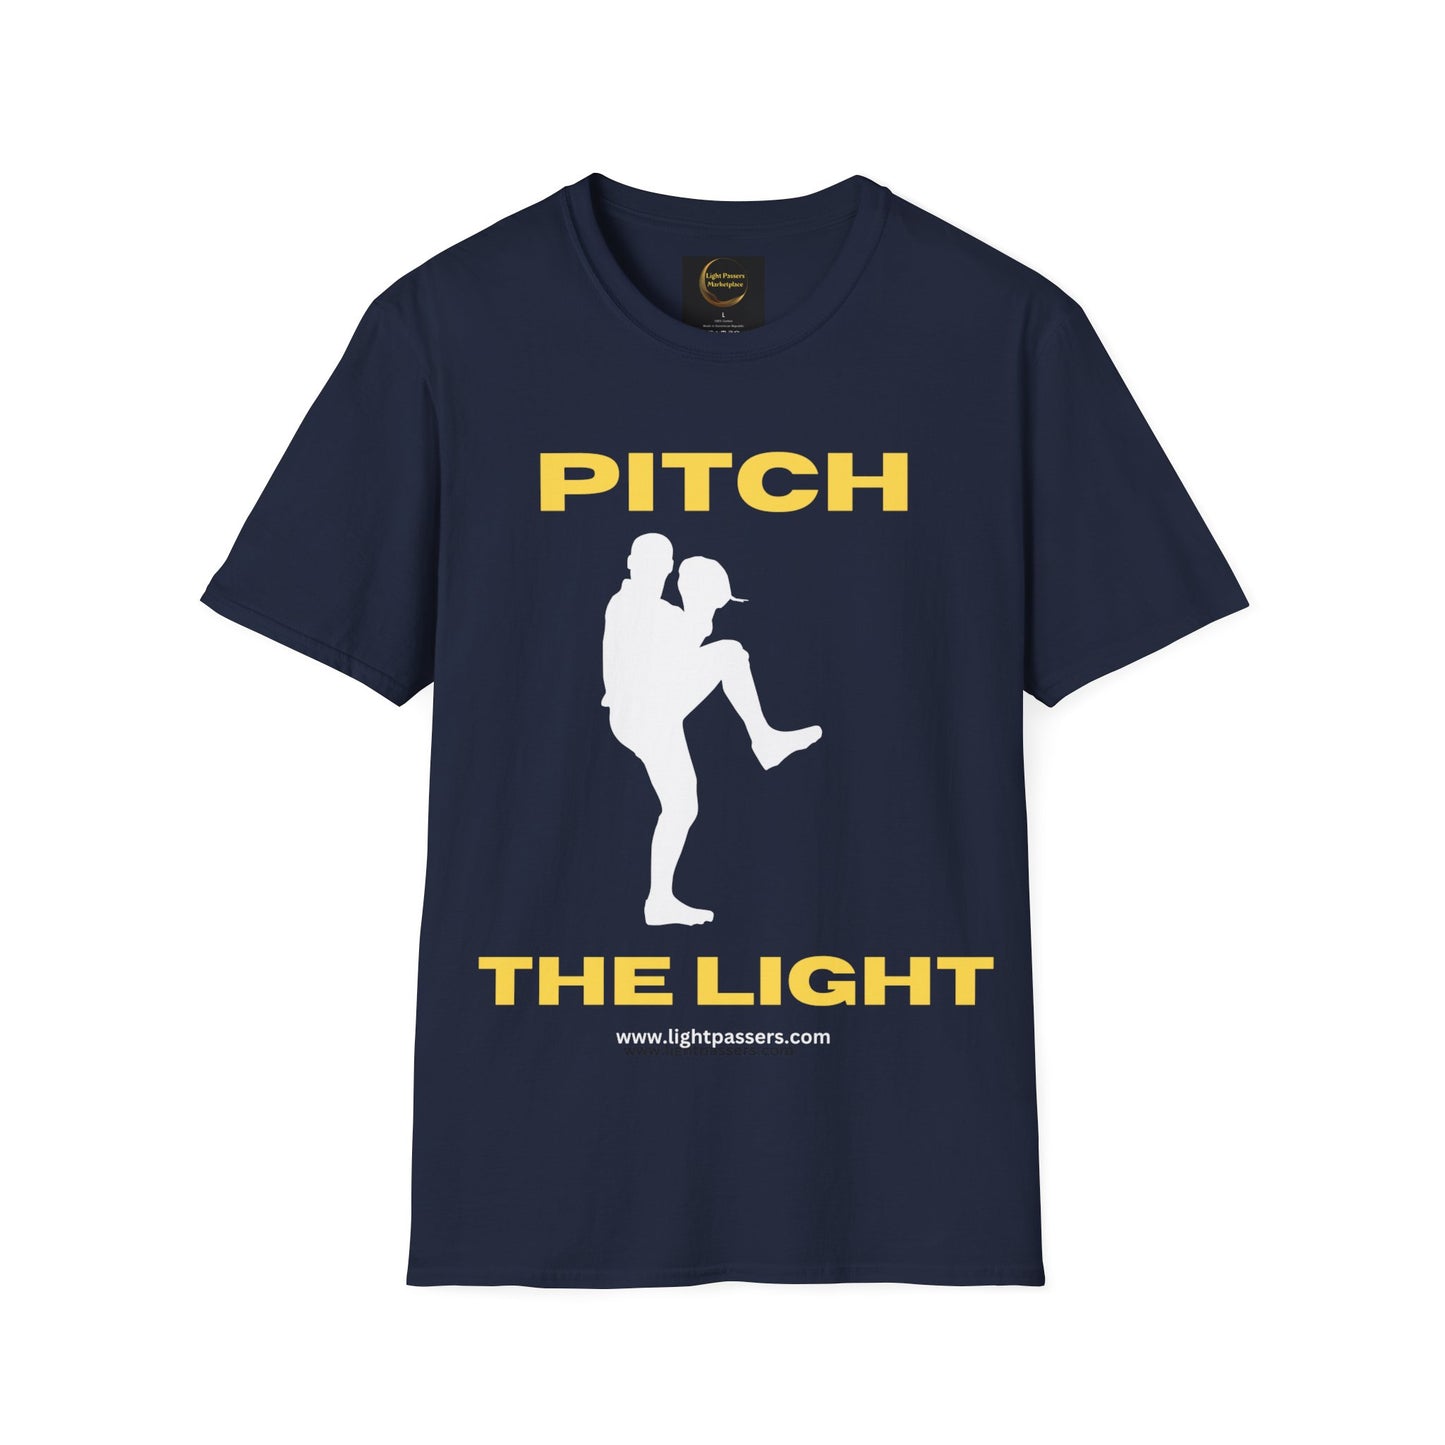 LIght Passers Marketplace Streak Lightning "PITCH THE LIGHT" in yellow lettering Unisex Soft T-Shirt Simple Messages, Fitness,